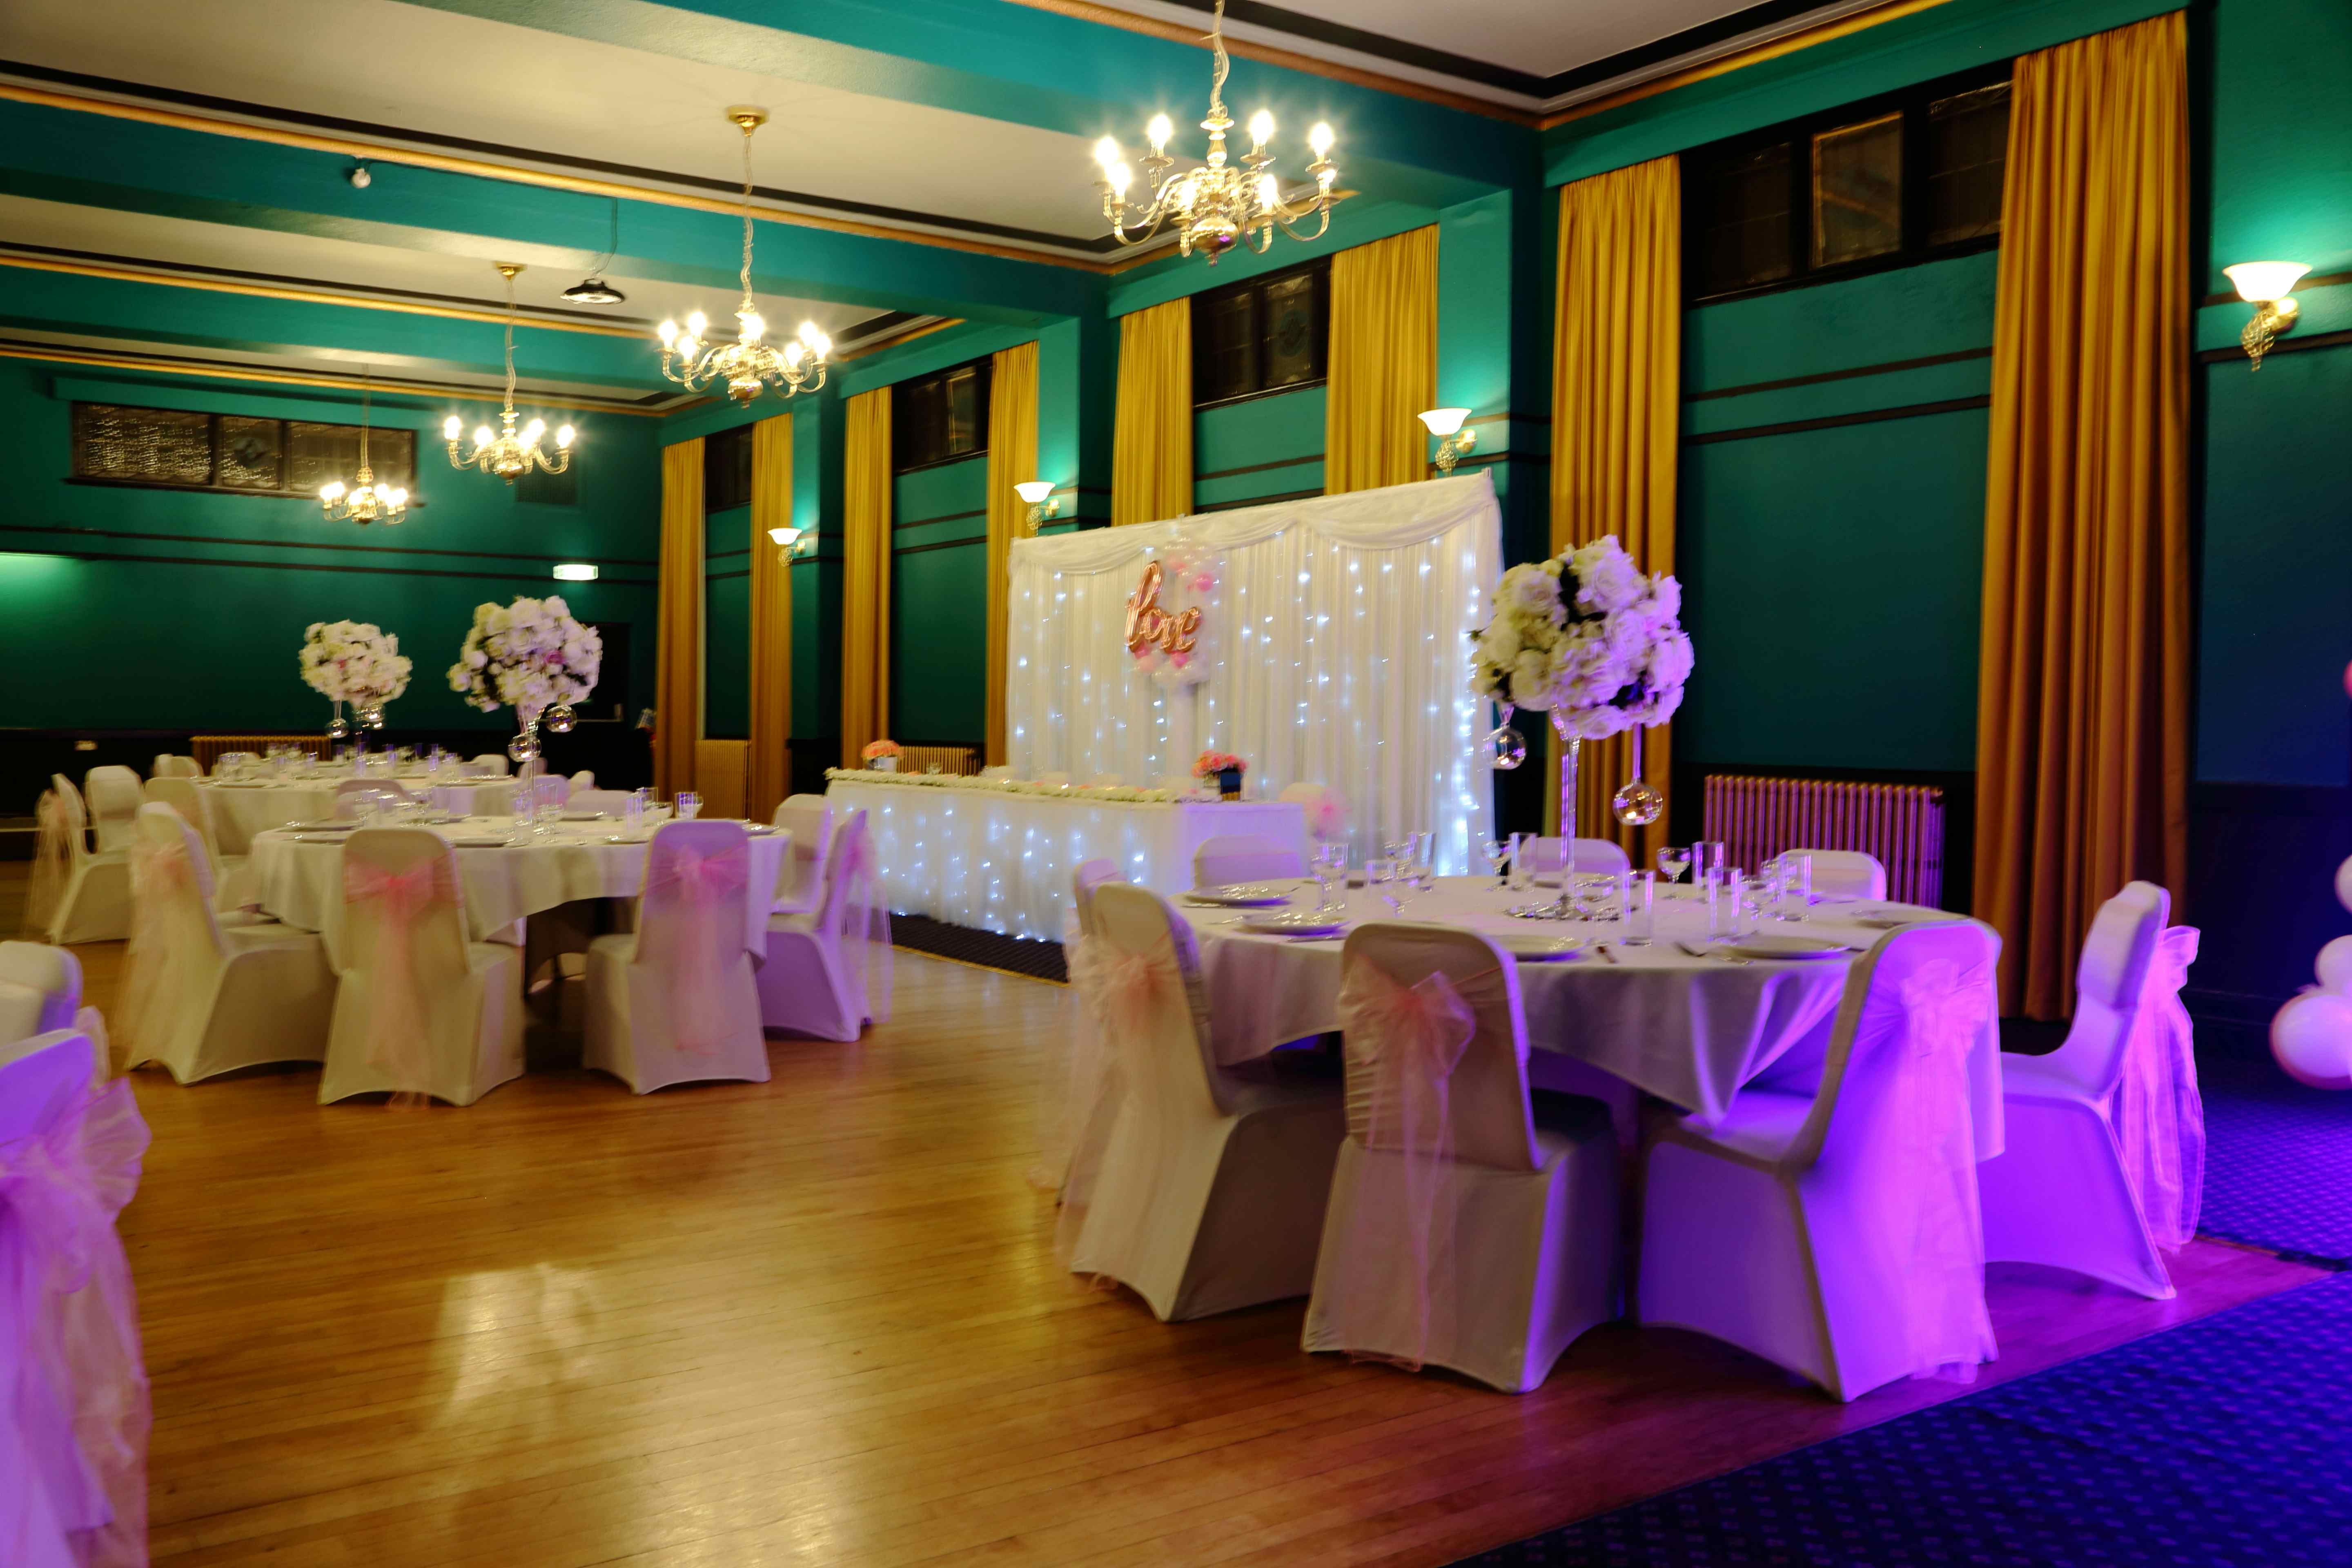 Wellington Suite, The Guildhall, Stockport